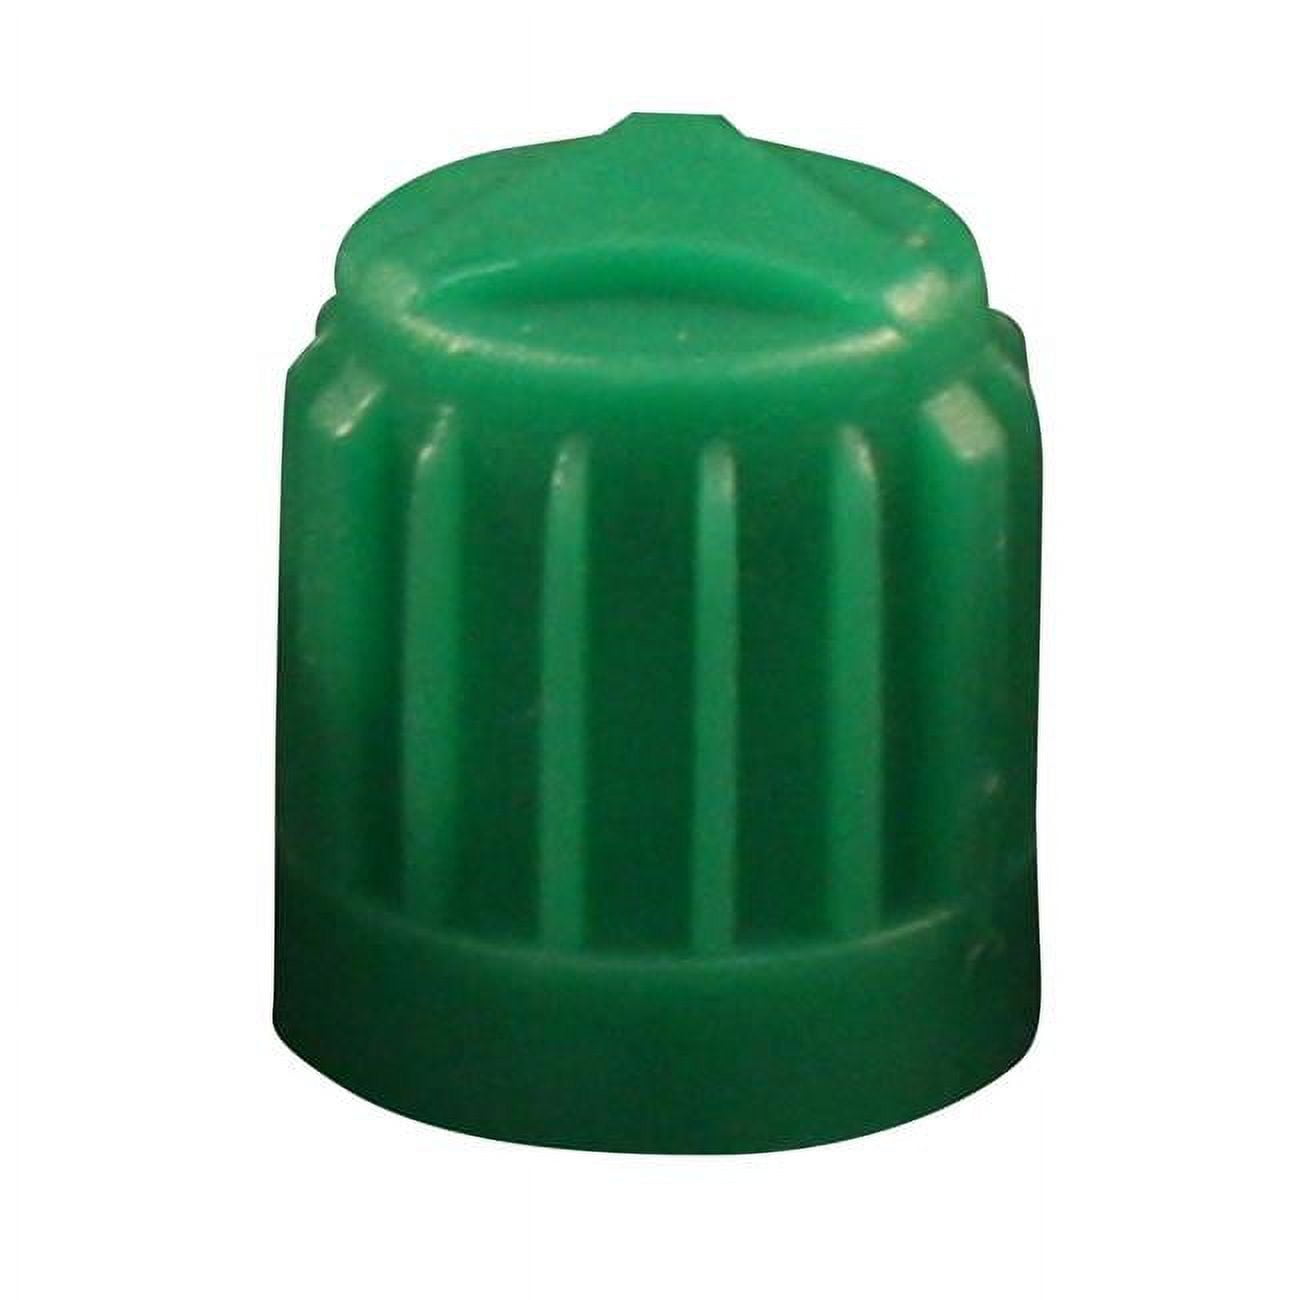 TR416 Replacement Tire Valve Stems With Grommets To Fit .453 Or